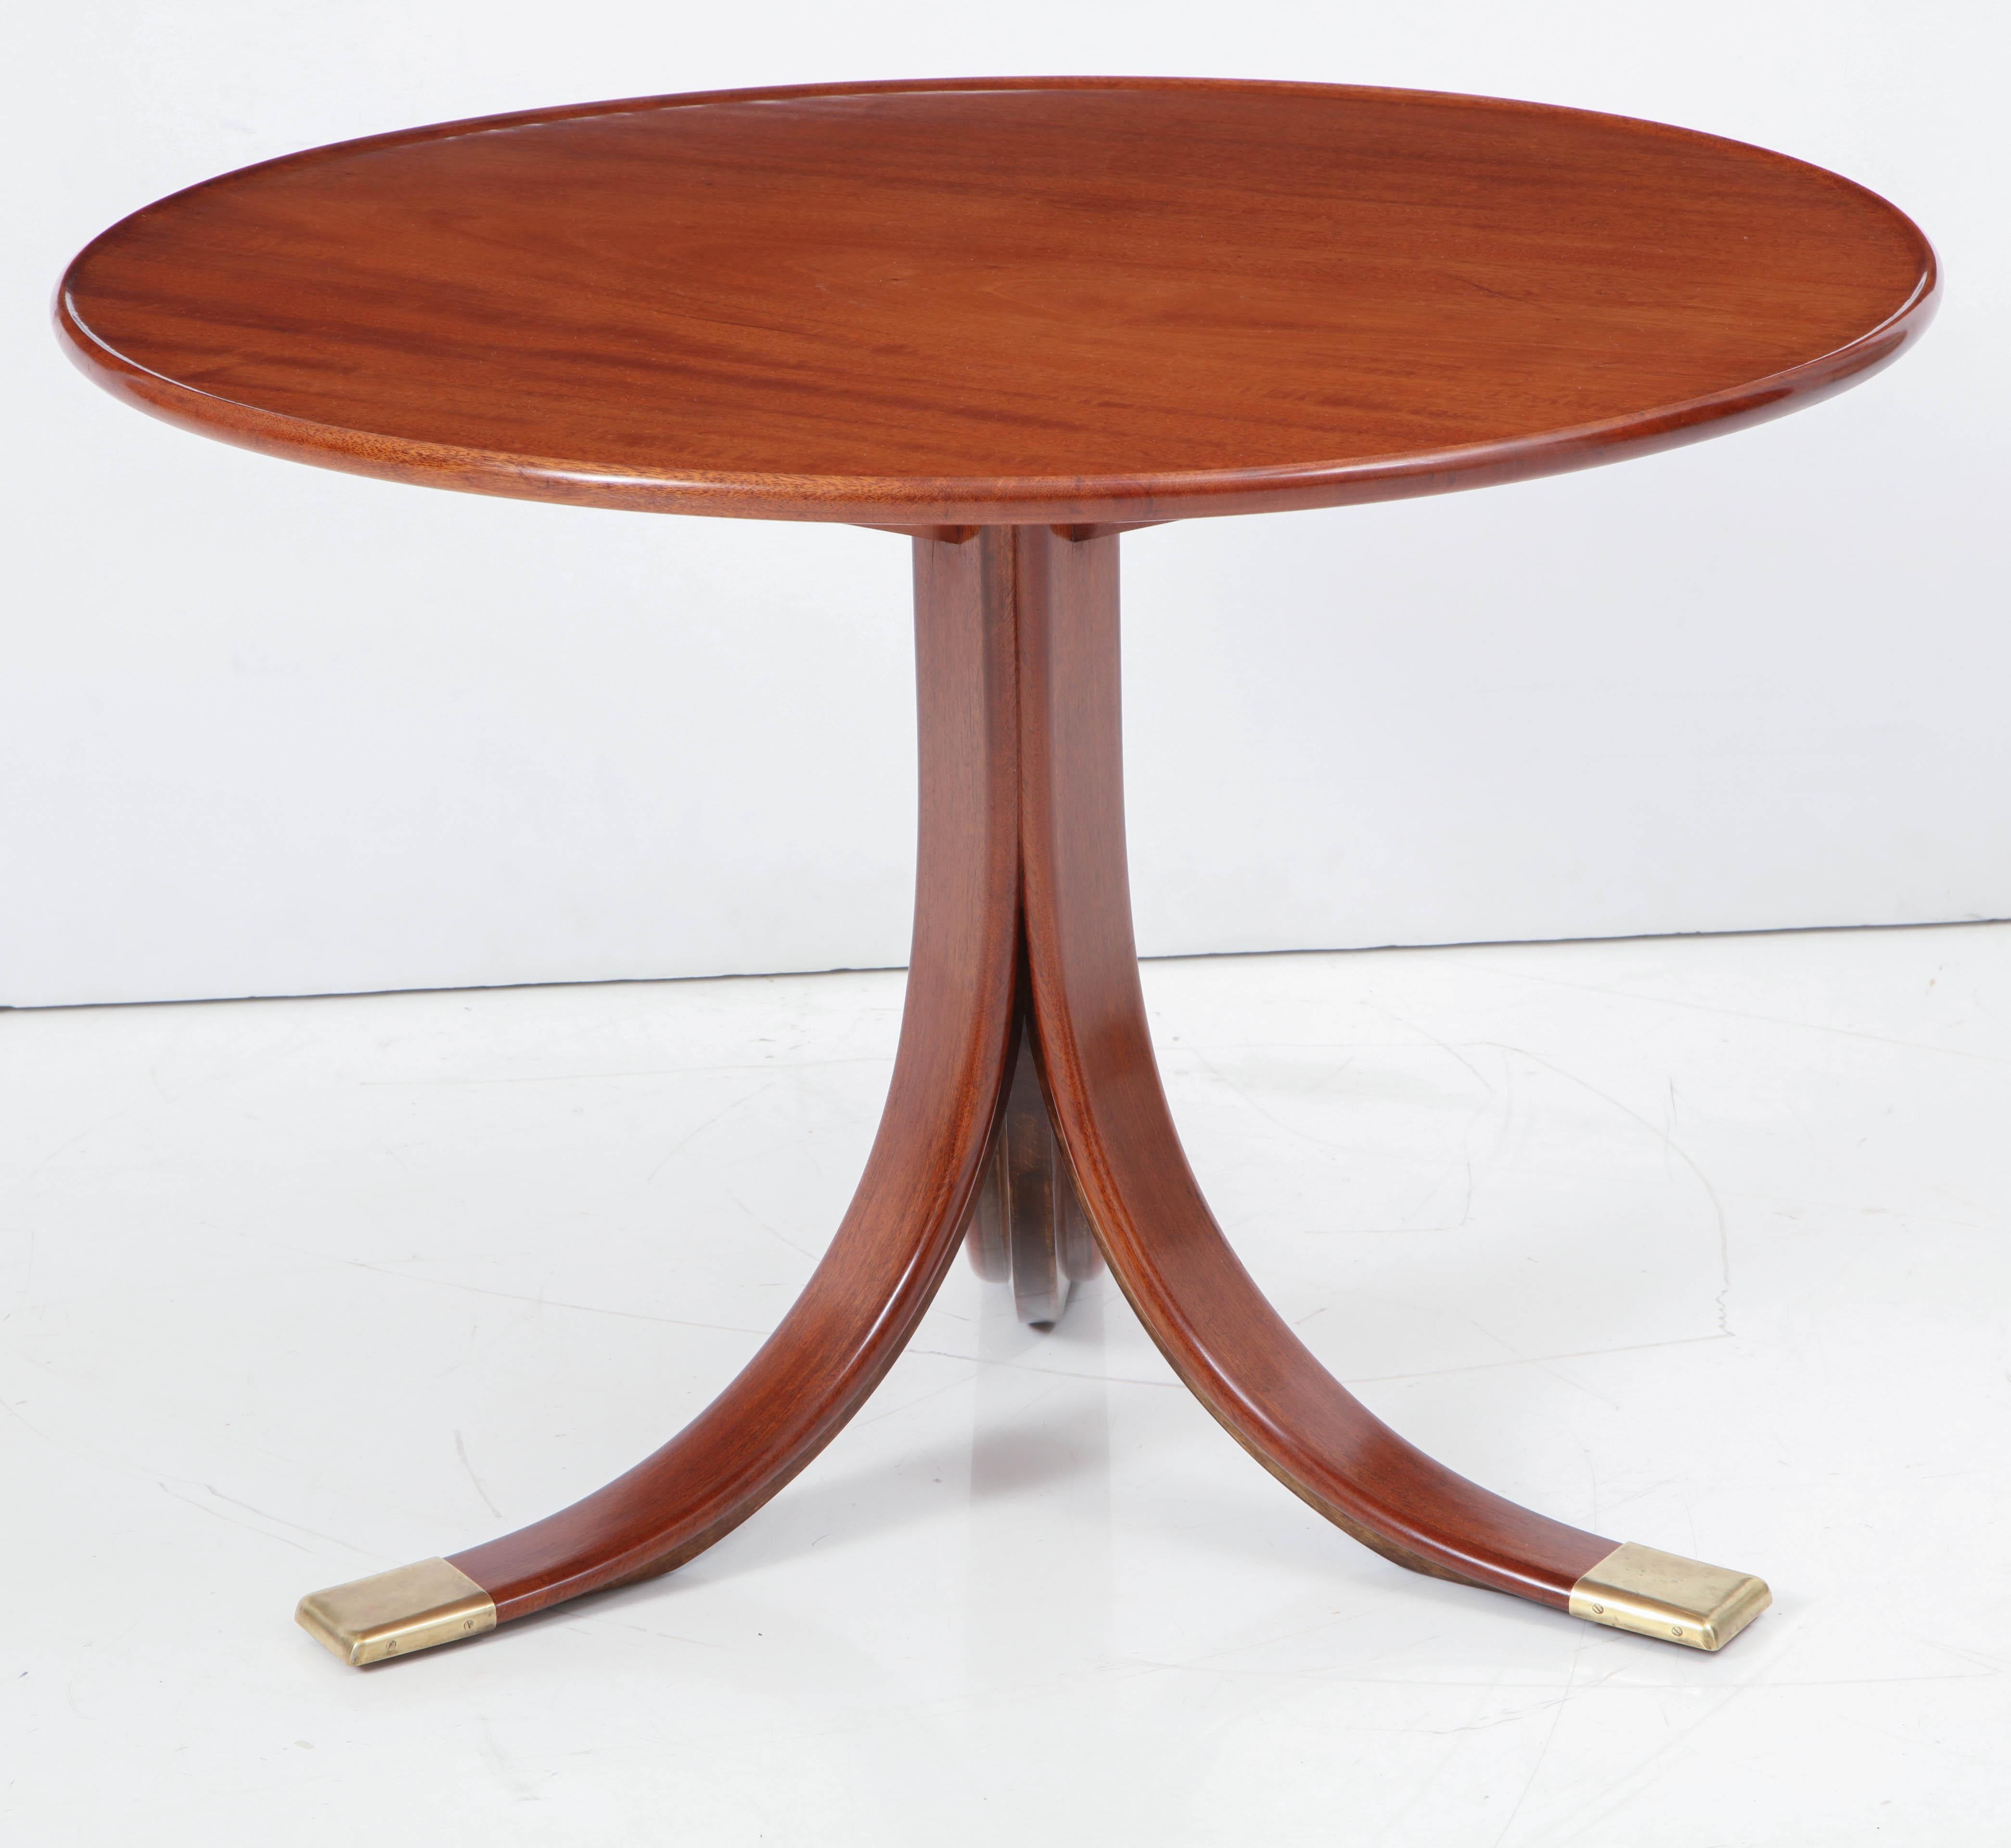 A Danish well figured mahogany and brass-mounted side table designed and produced by Frits Henningsen, circa1940s, the solid circular top with a lipped edge, raised on a wide downswept leg tripod base ending with brass sabots.